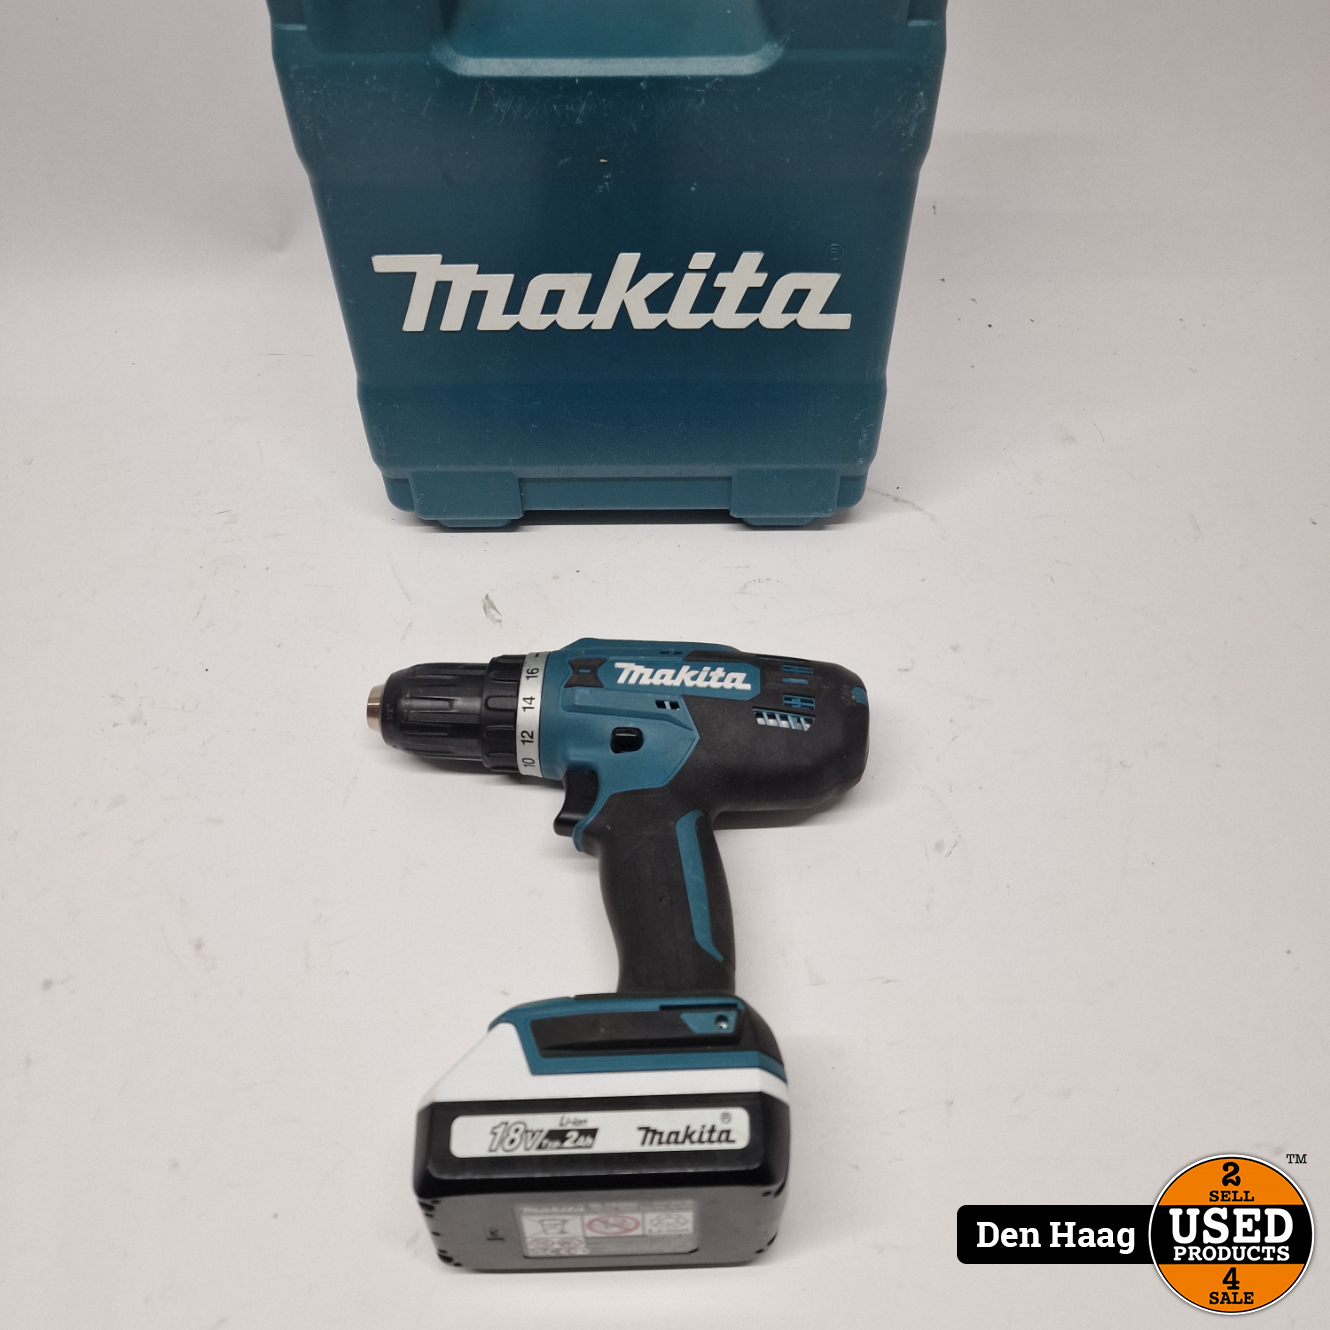 Makita accuboormachine nette - Used Products Den Haag